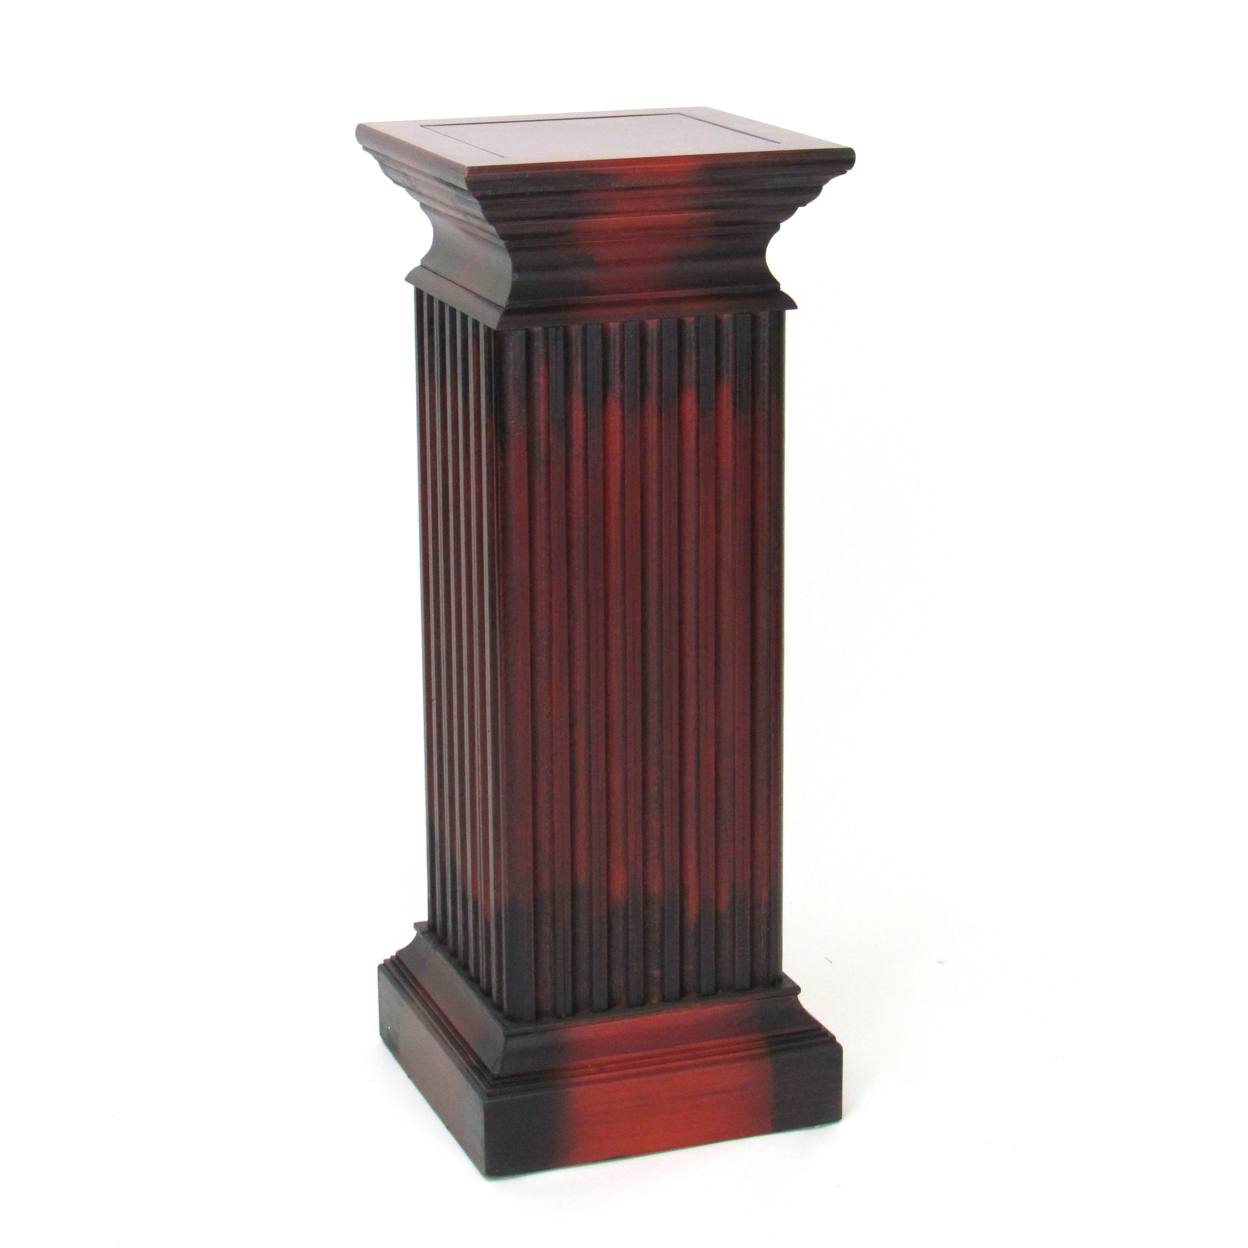 Transitional Style Square Top Pedestal Stand, Brown- Saltoro Sherpi